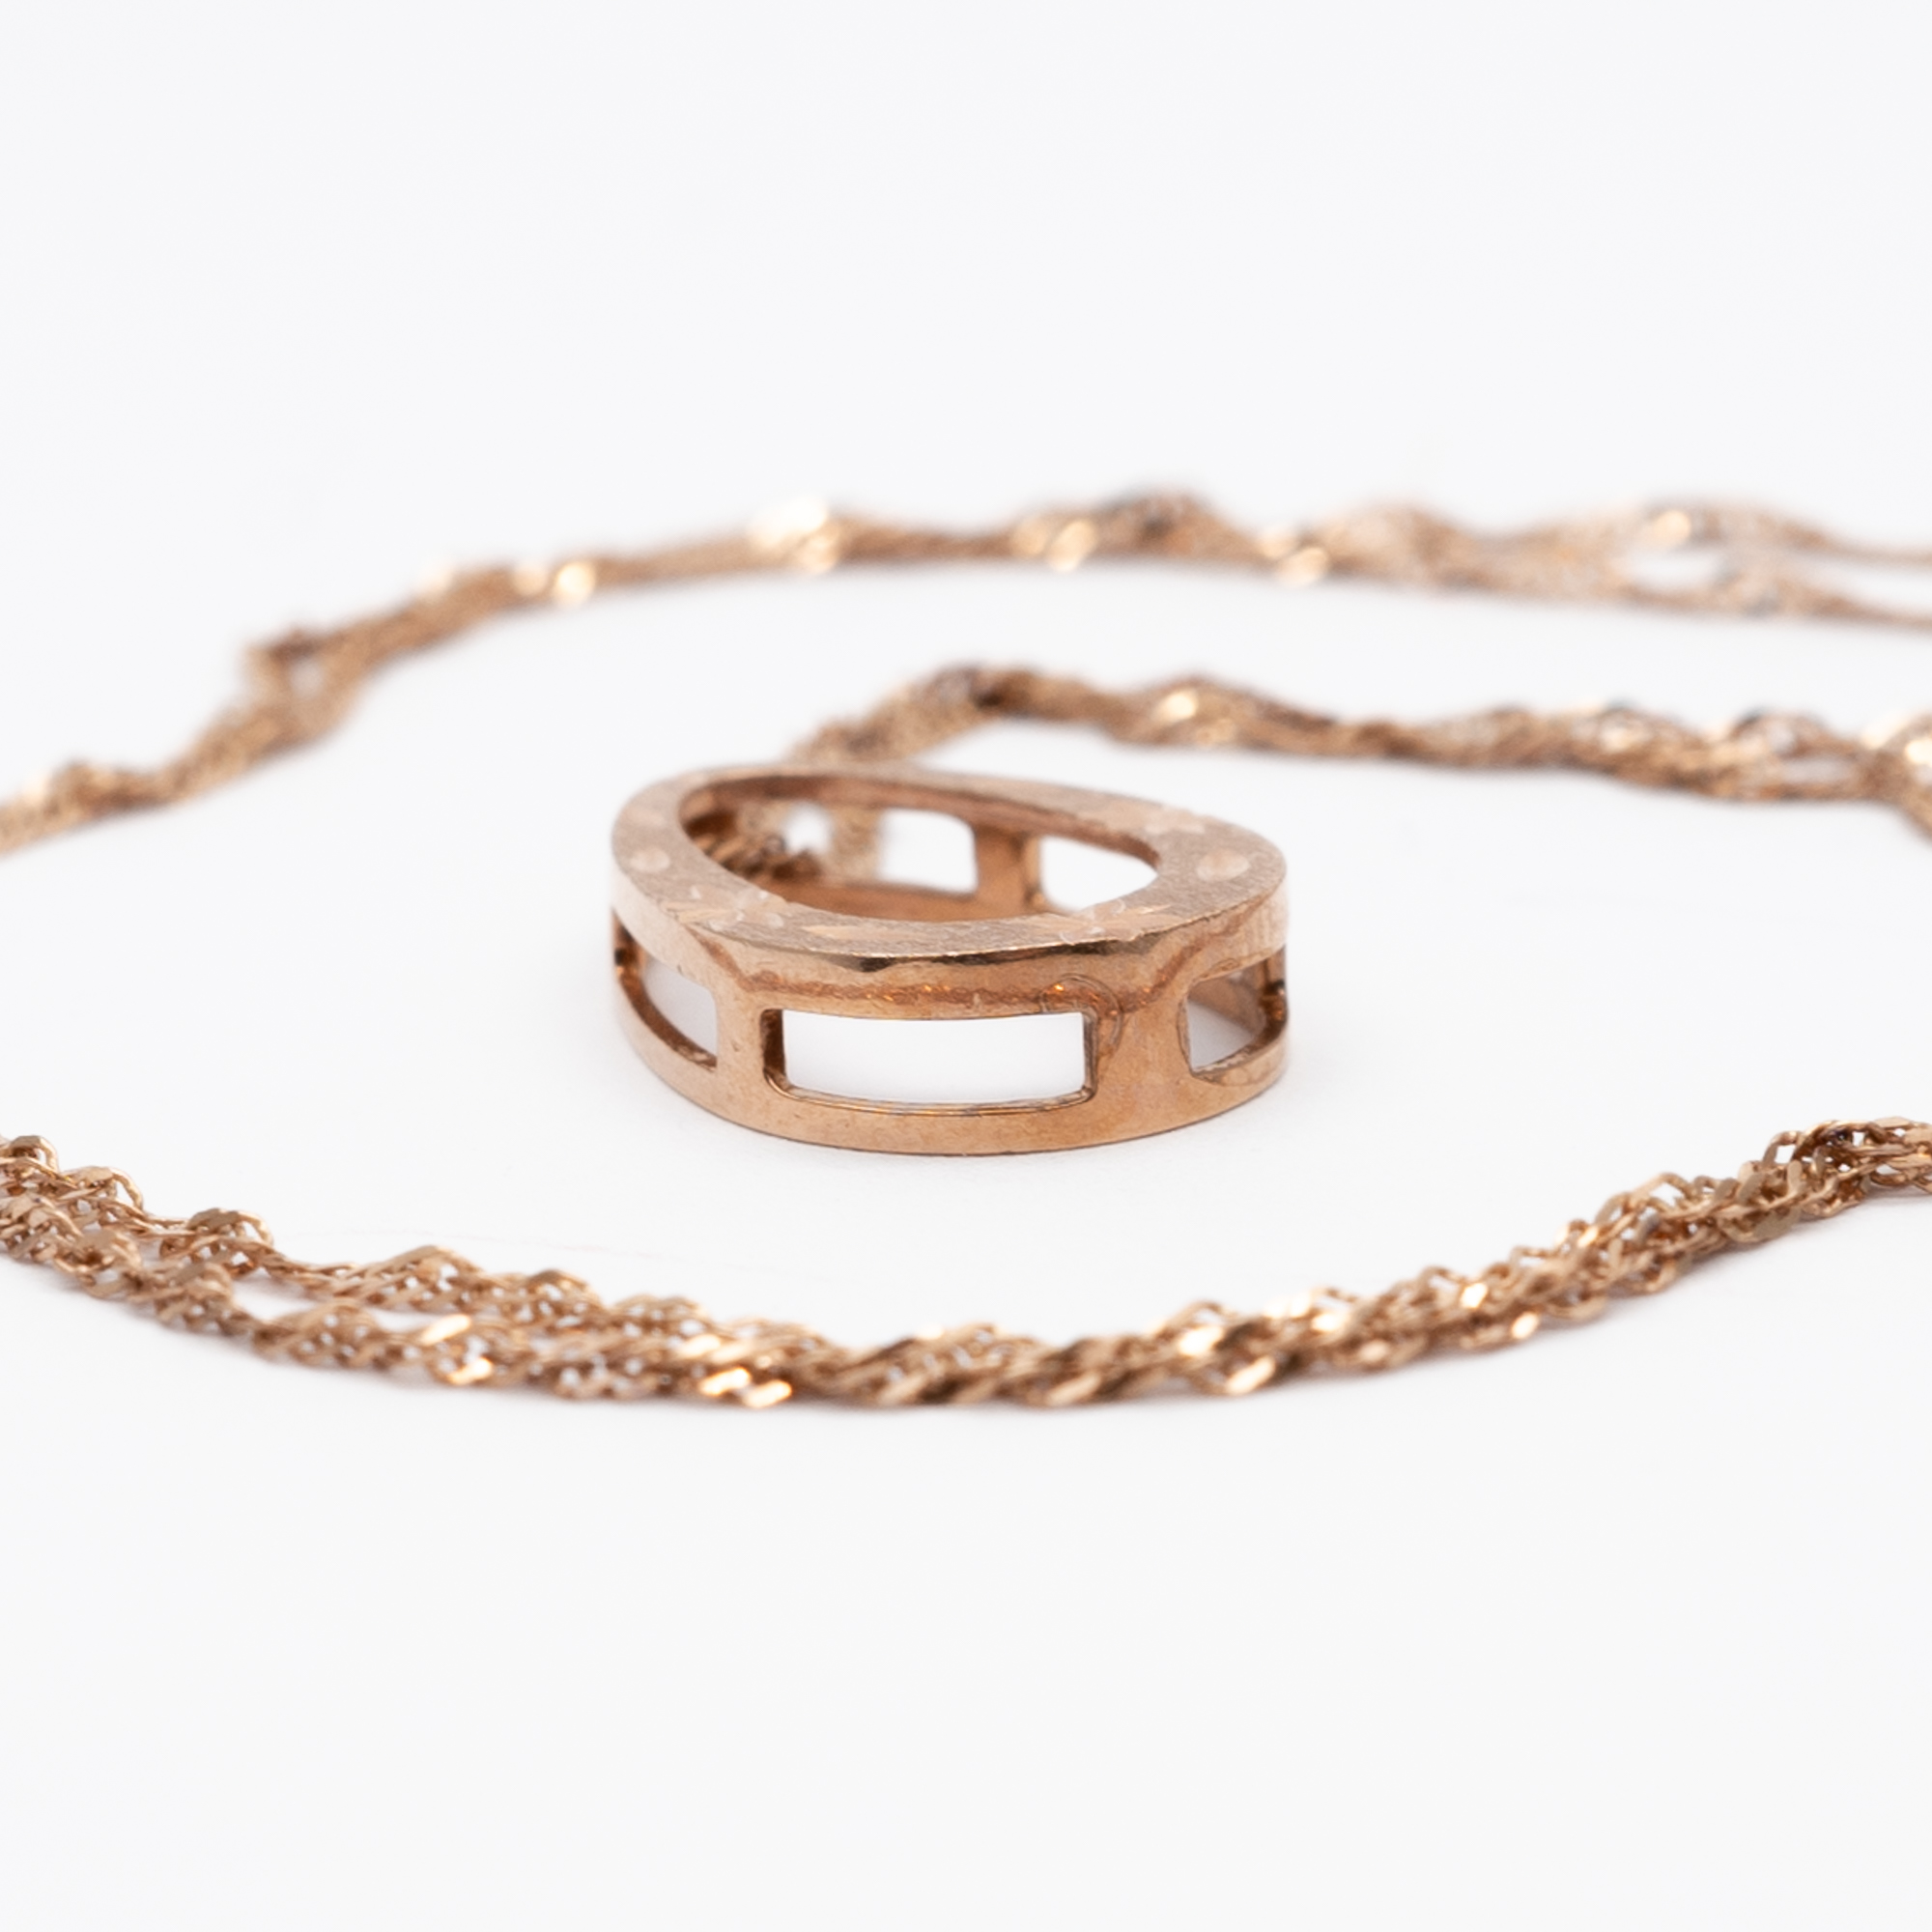 A 9ct rose gold pendant and chain - Image 2 of 4